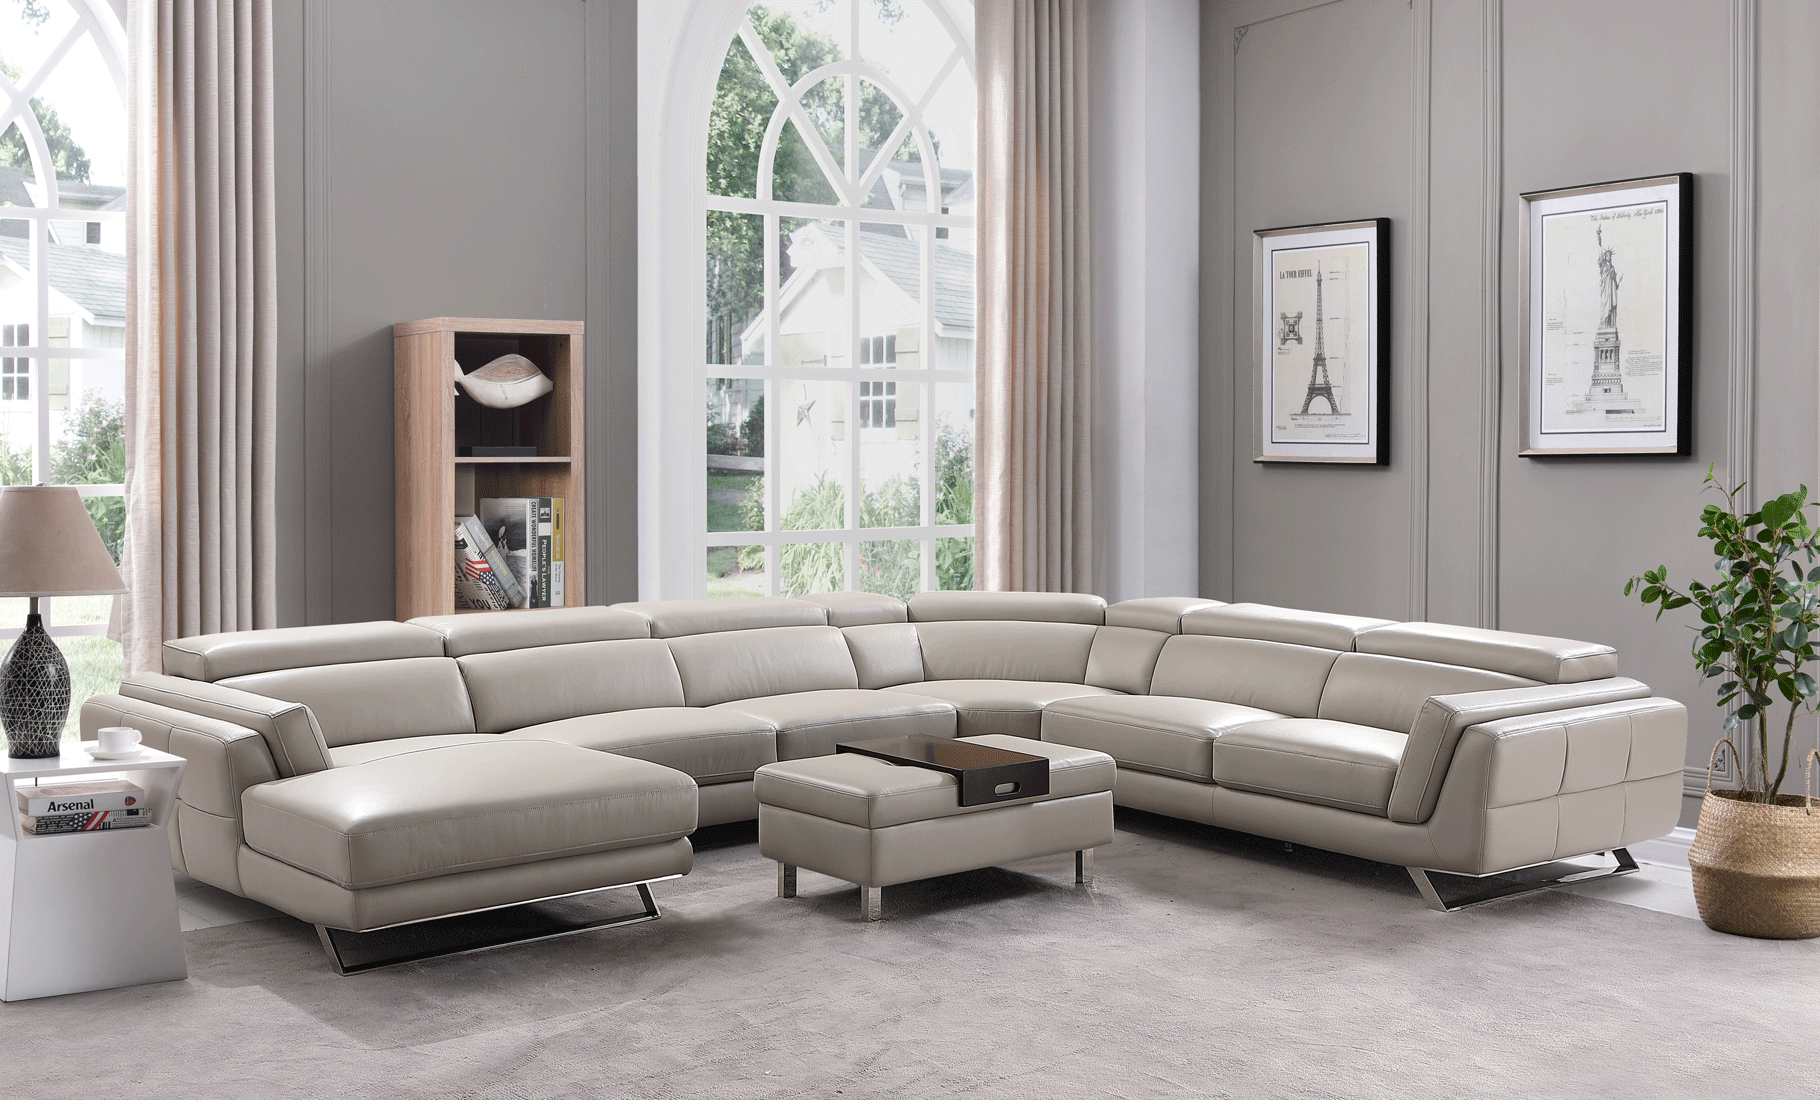 Brands ALF Capri Coffee Tables, Italy 582 Sectional Left